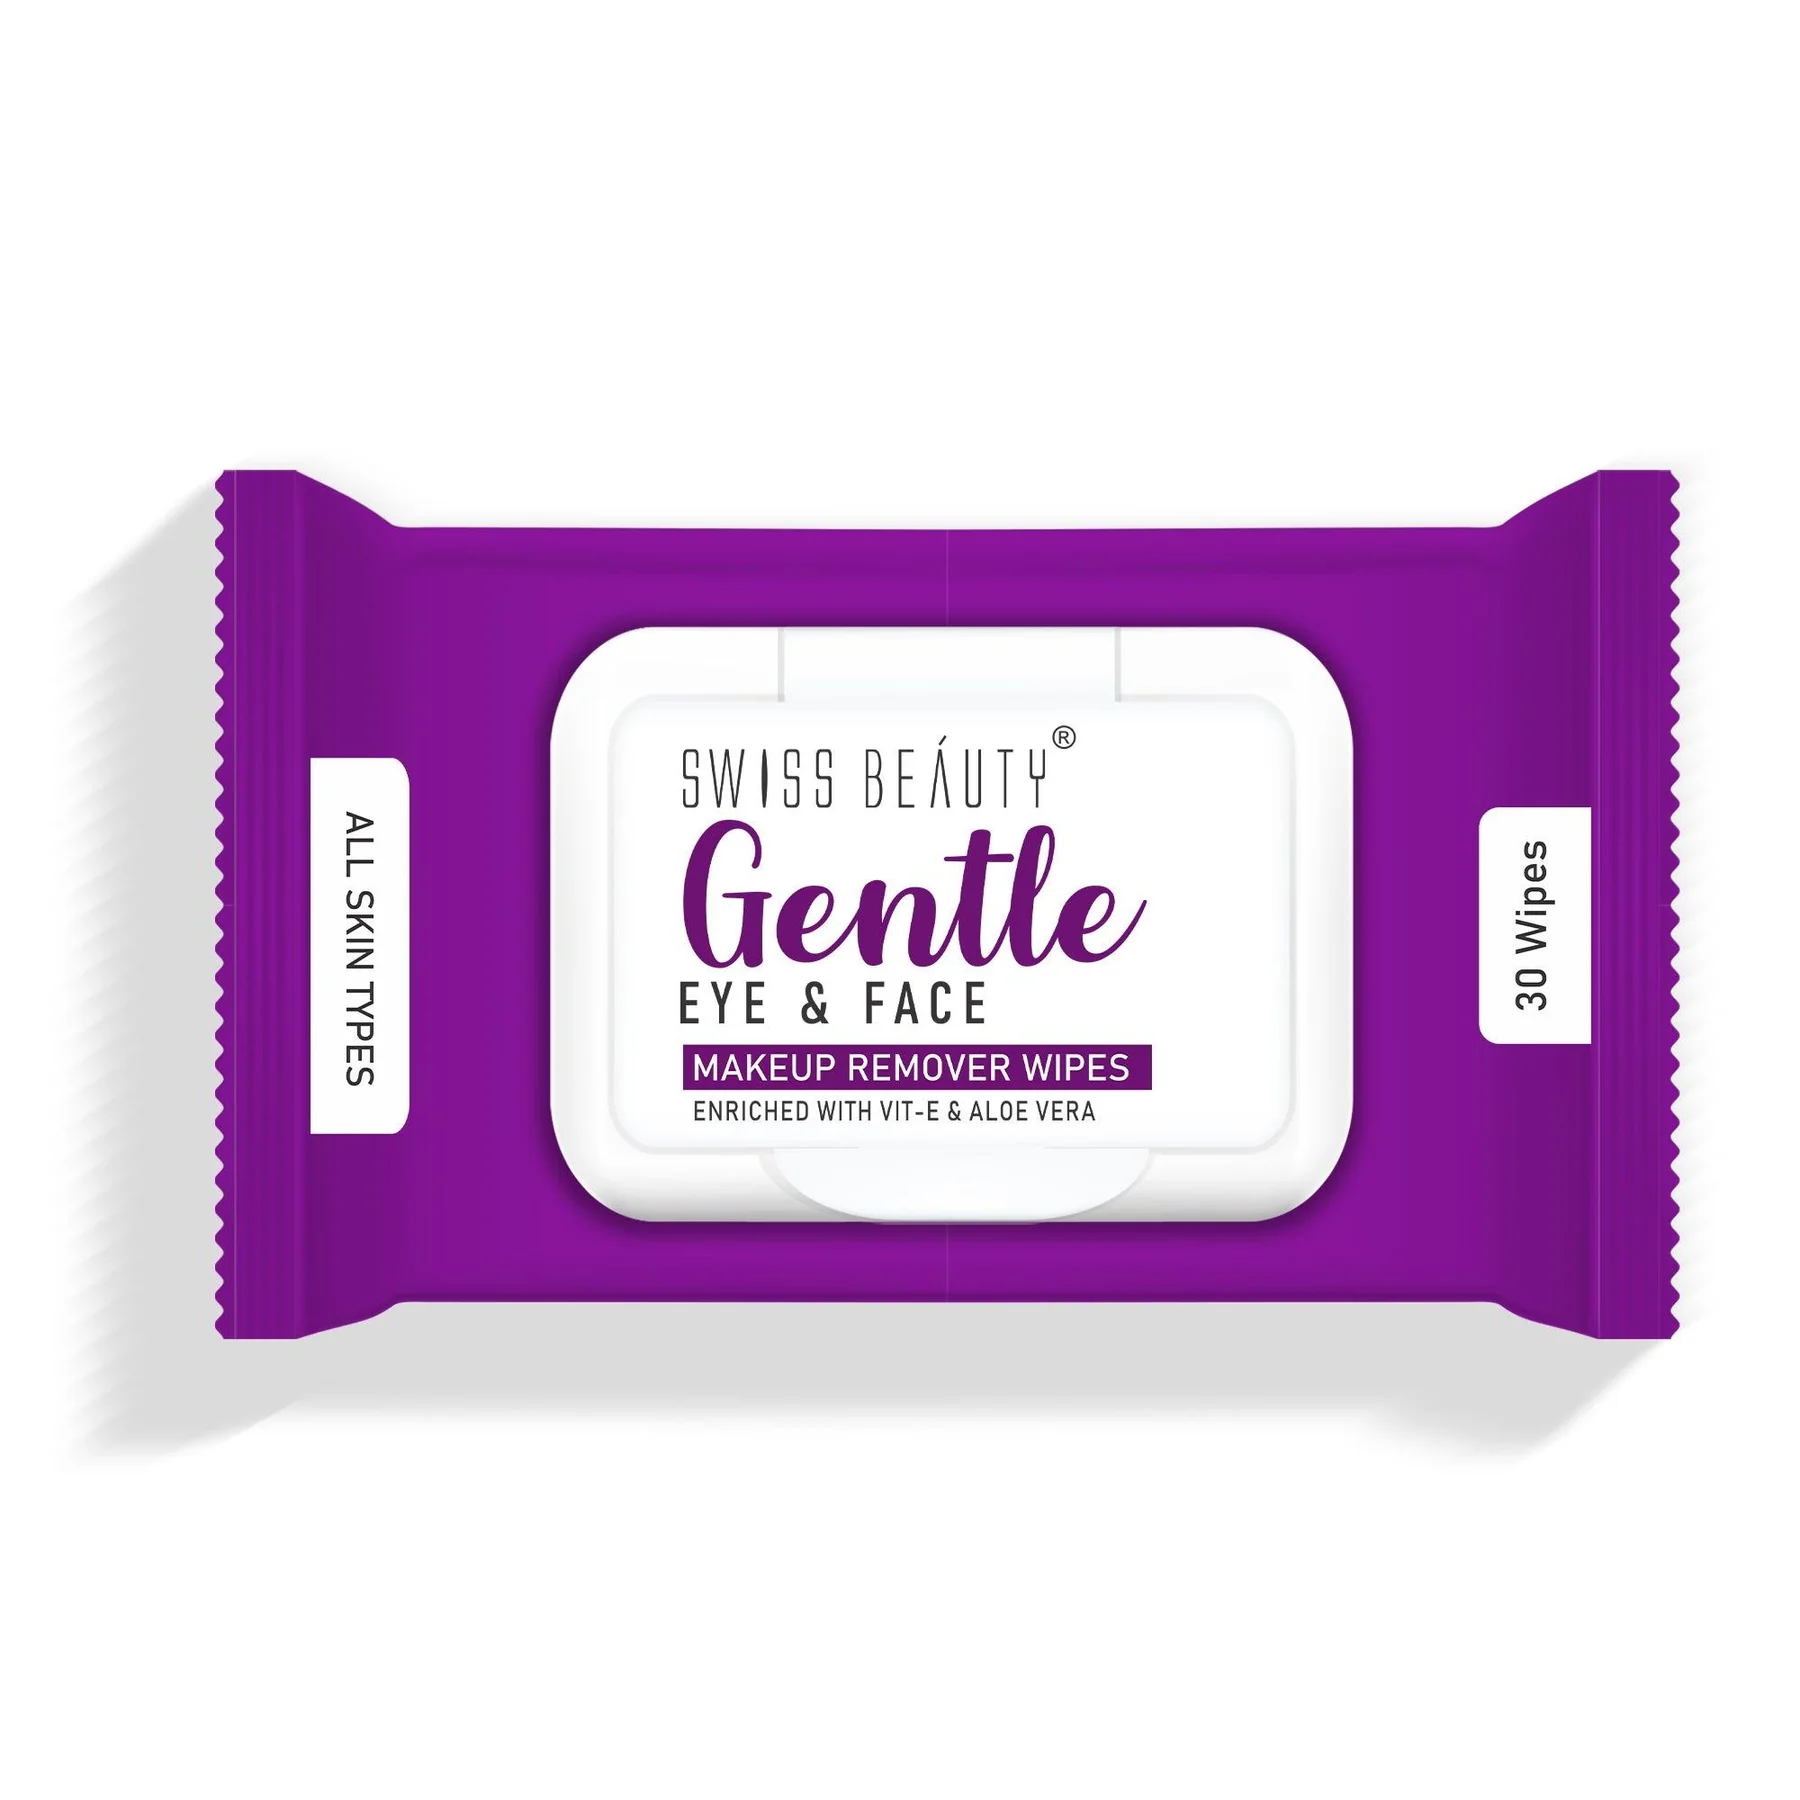 Swiss beauty gentle eye and face makeup remover wipes